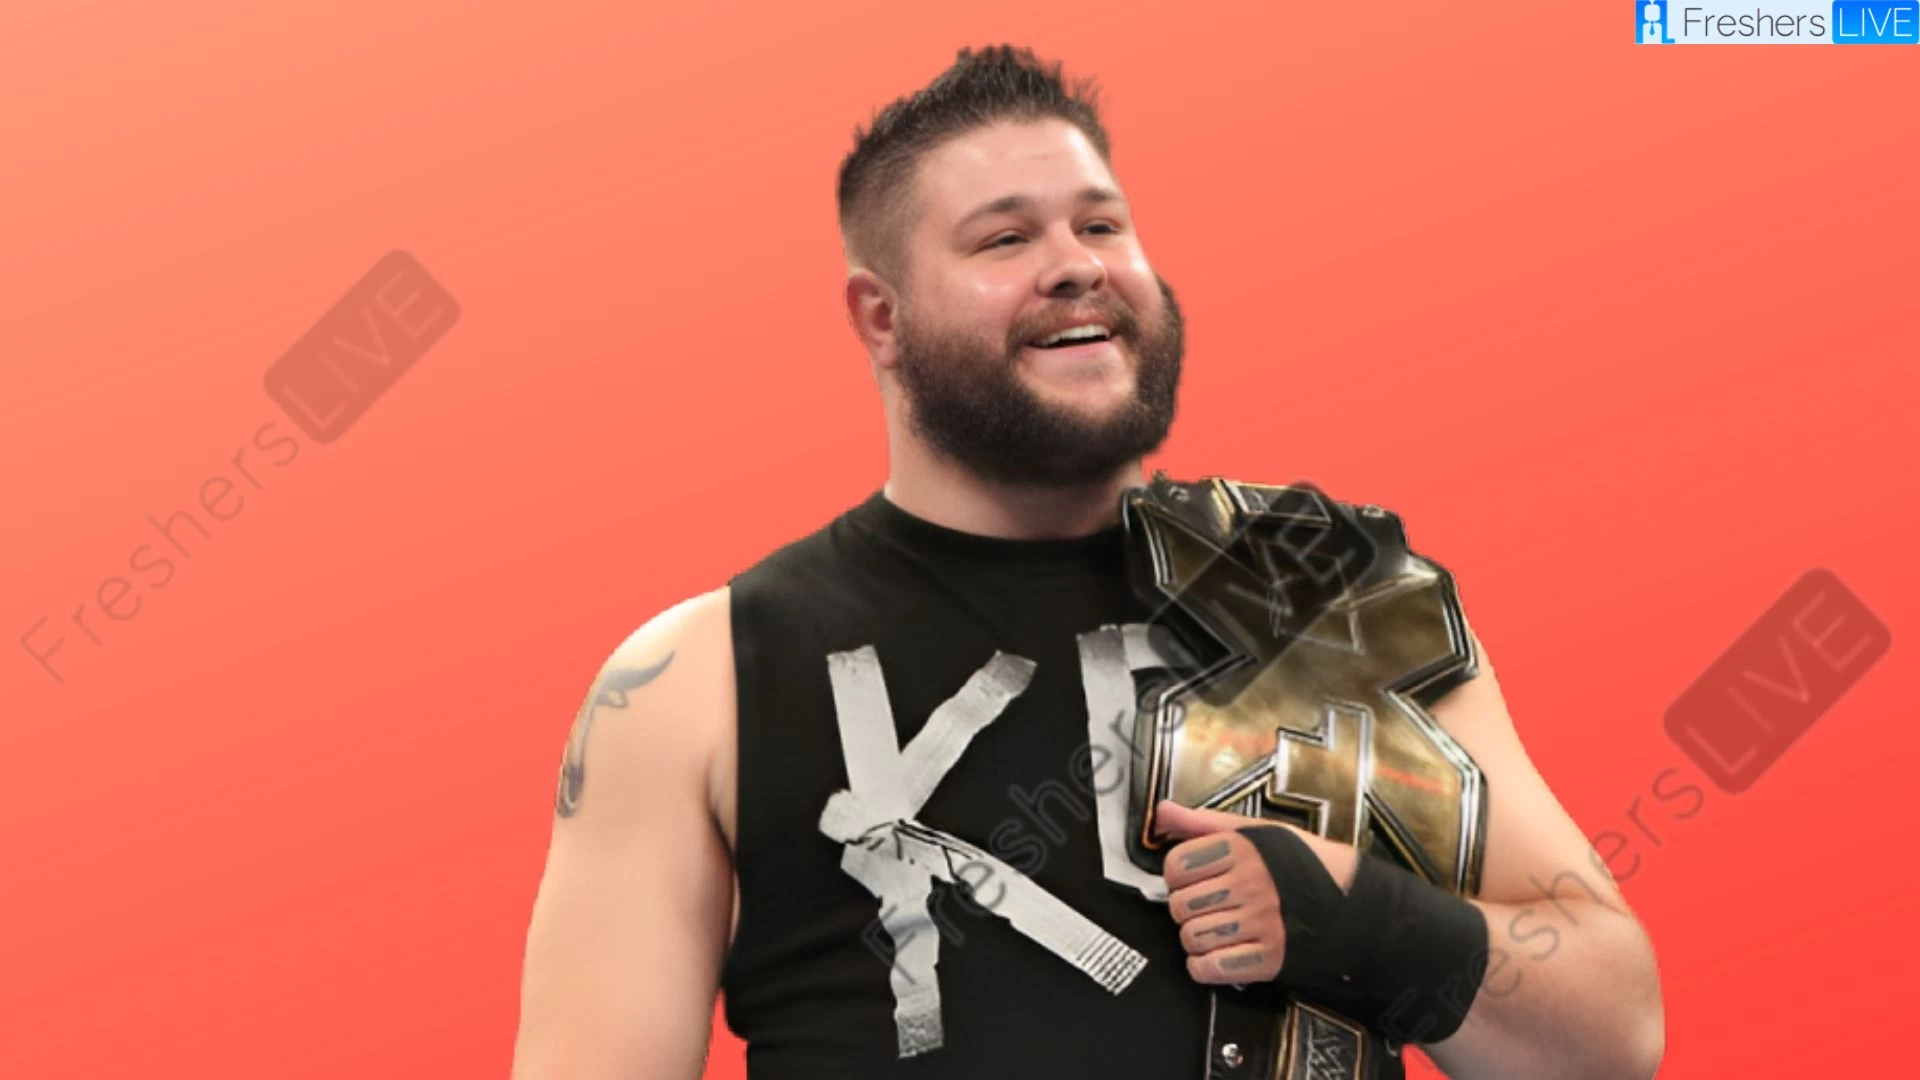 Kevin Owens Ethnicity, What is Kevin Owens's Ethnicity?